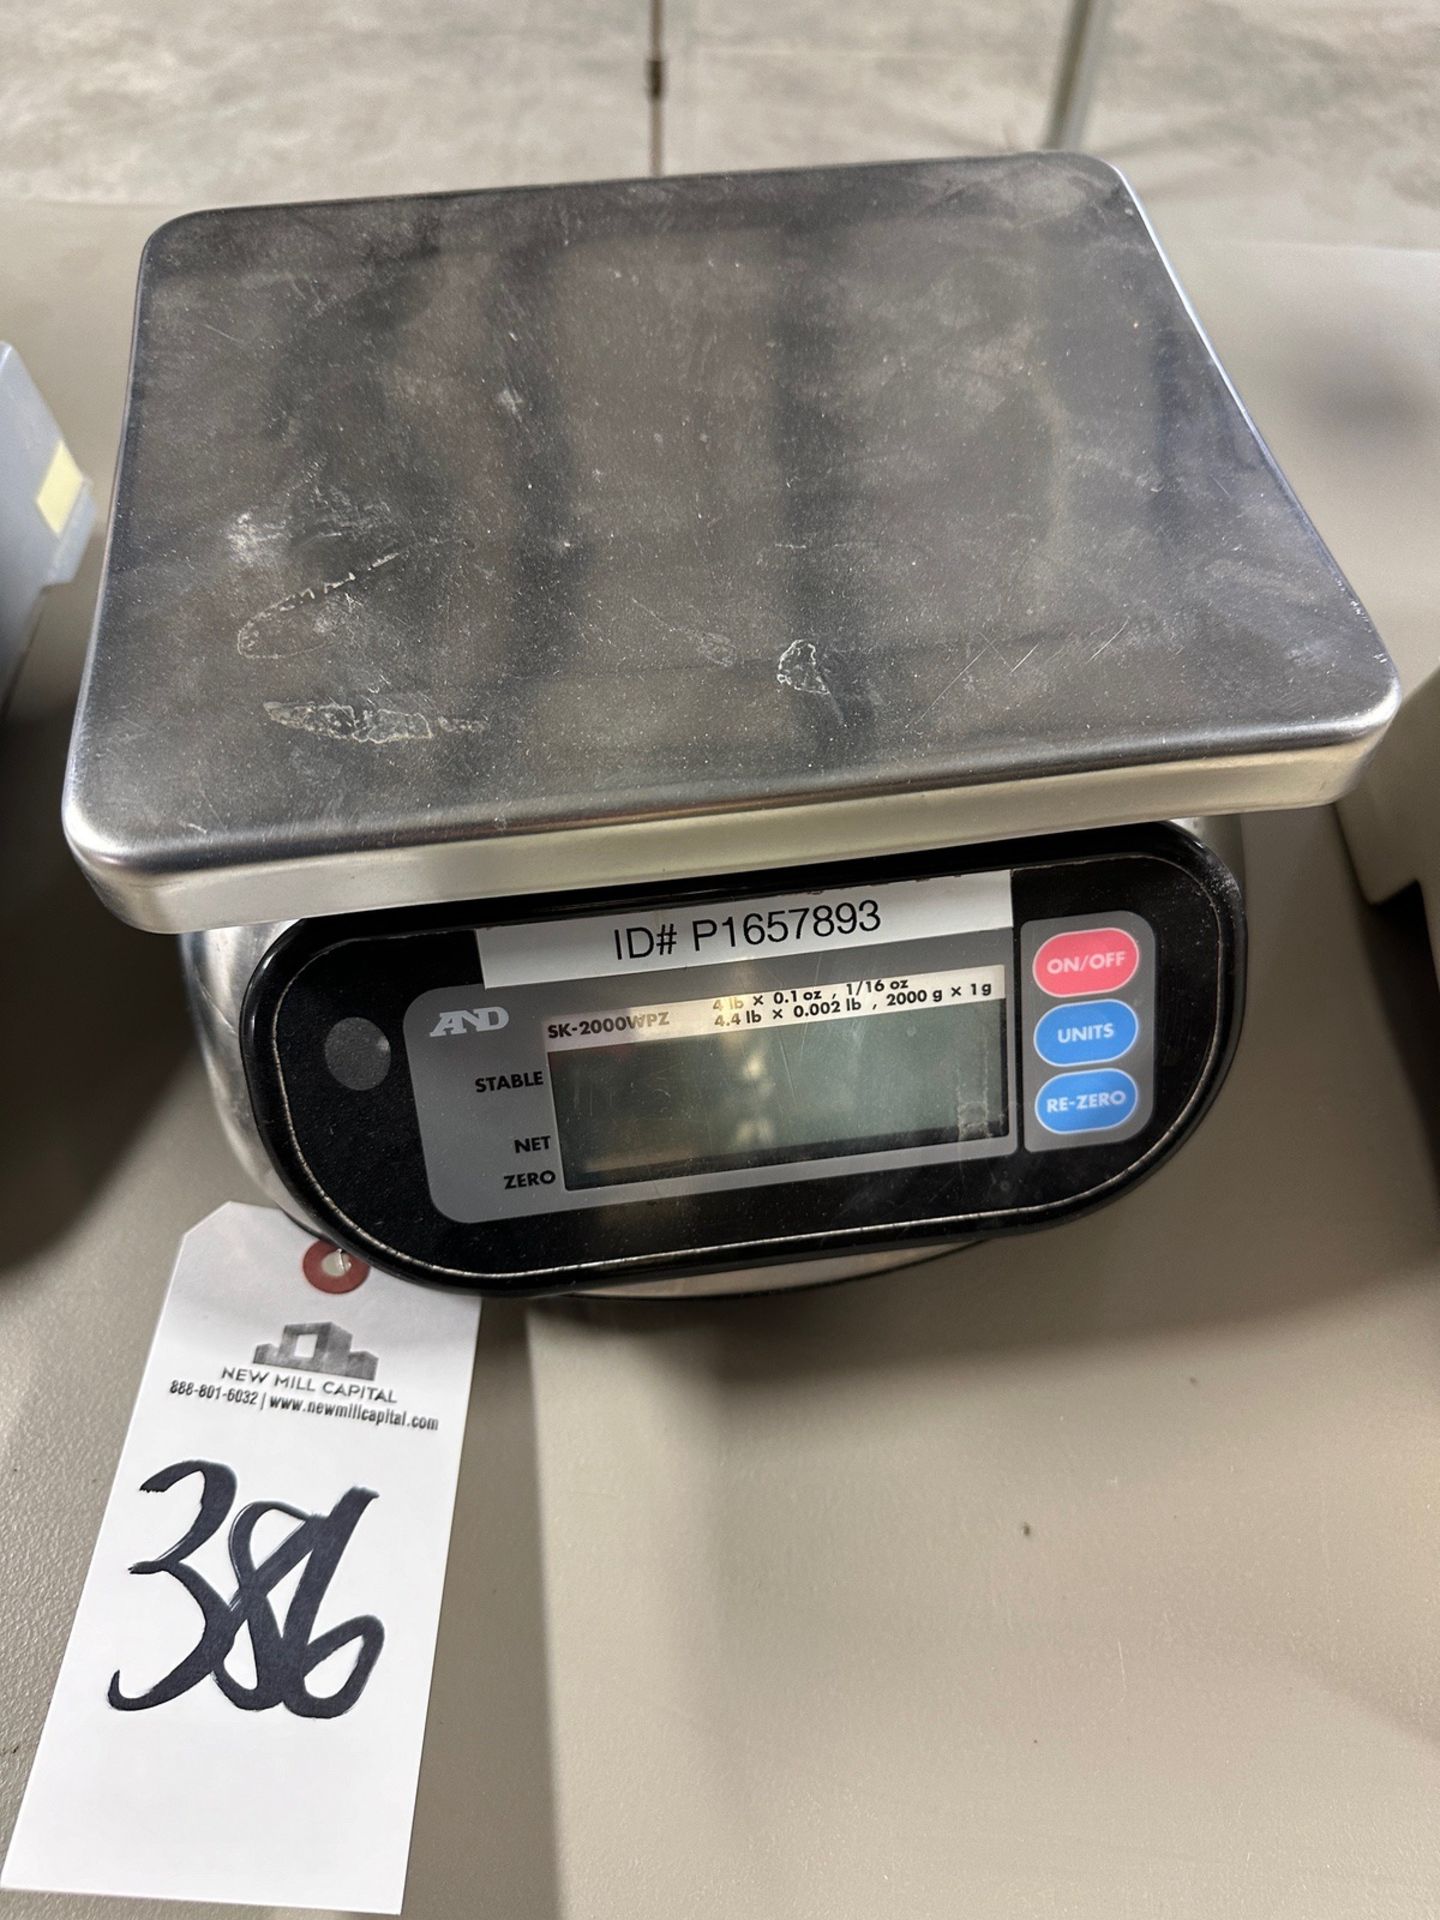 A&D Model SK-2000WPZ Washdown Scale with 4.4 LB Capacity | Rig Fee $25